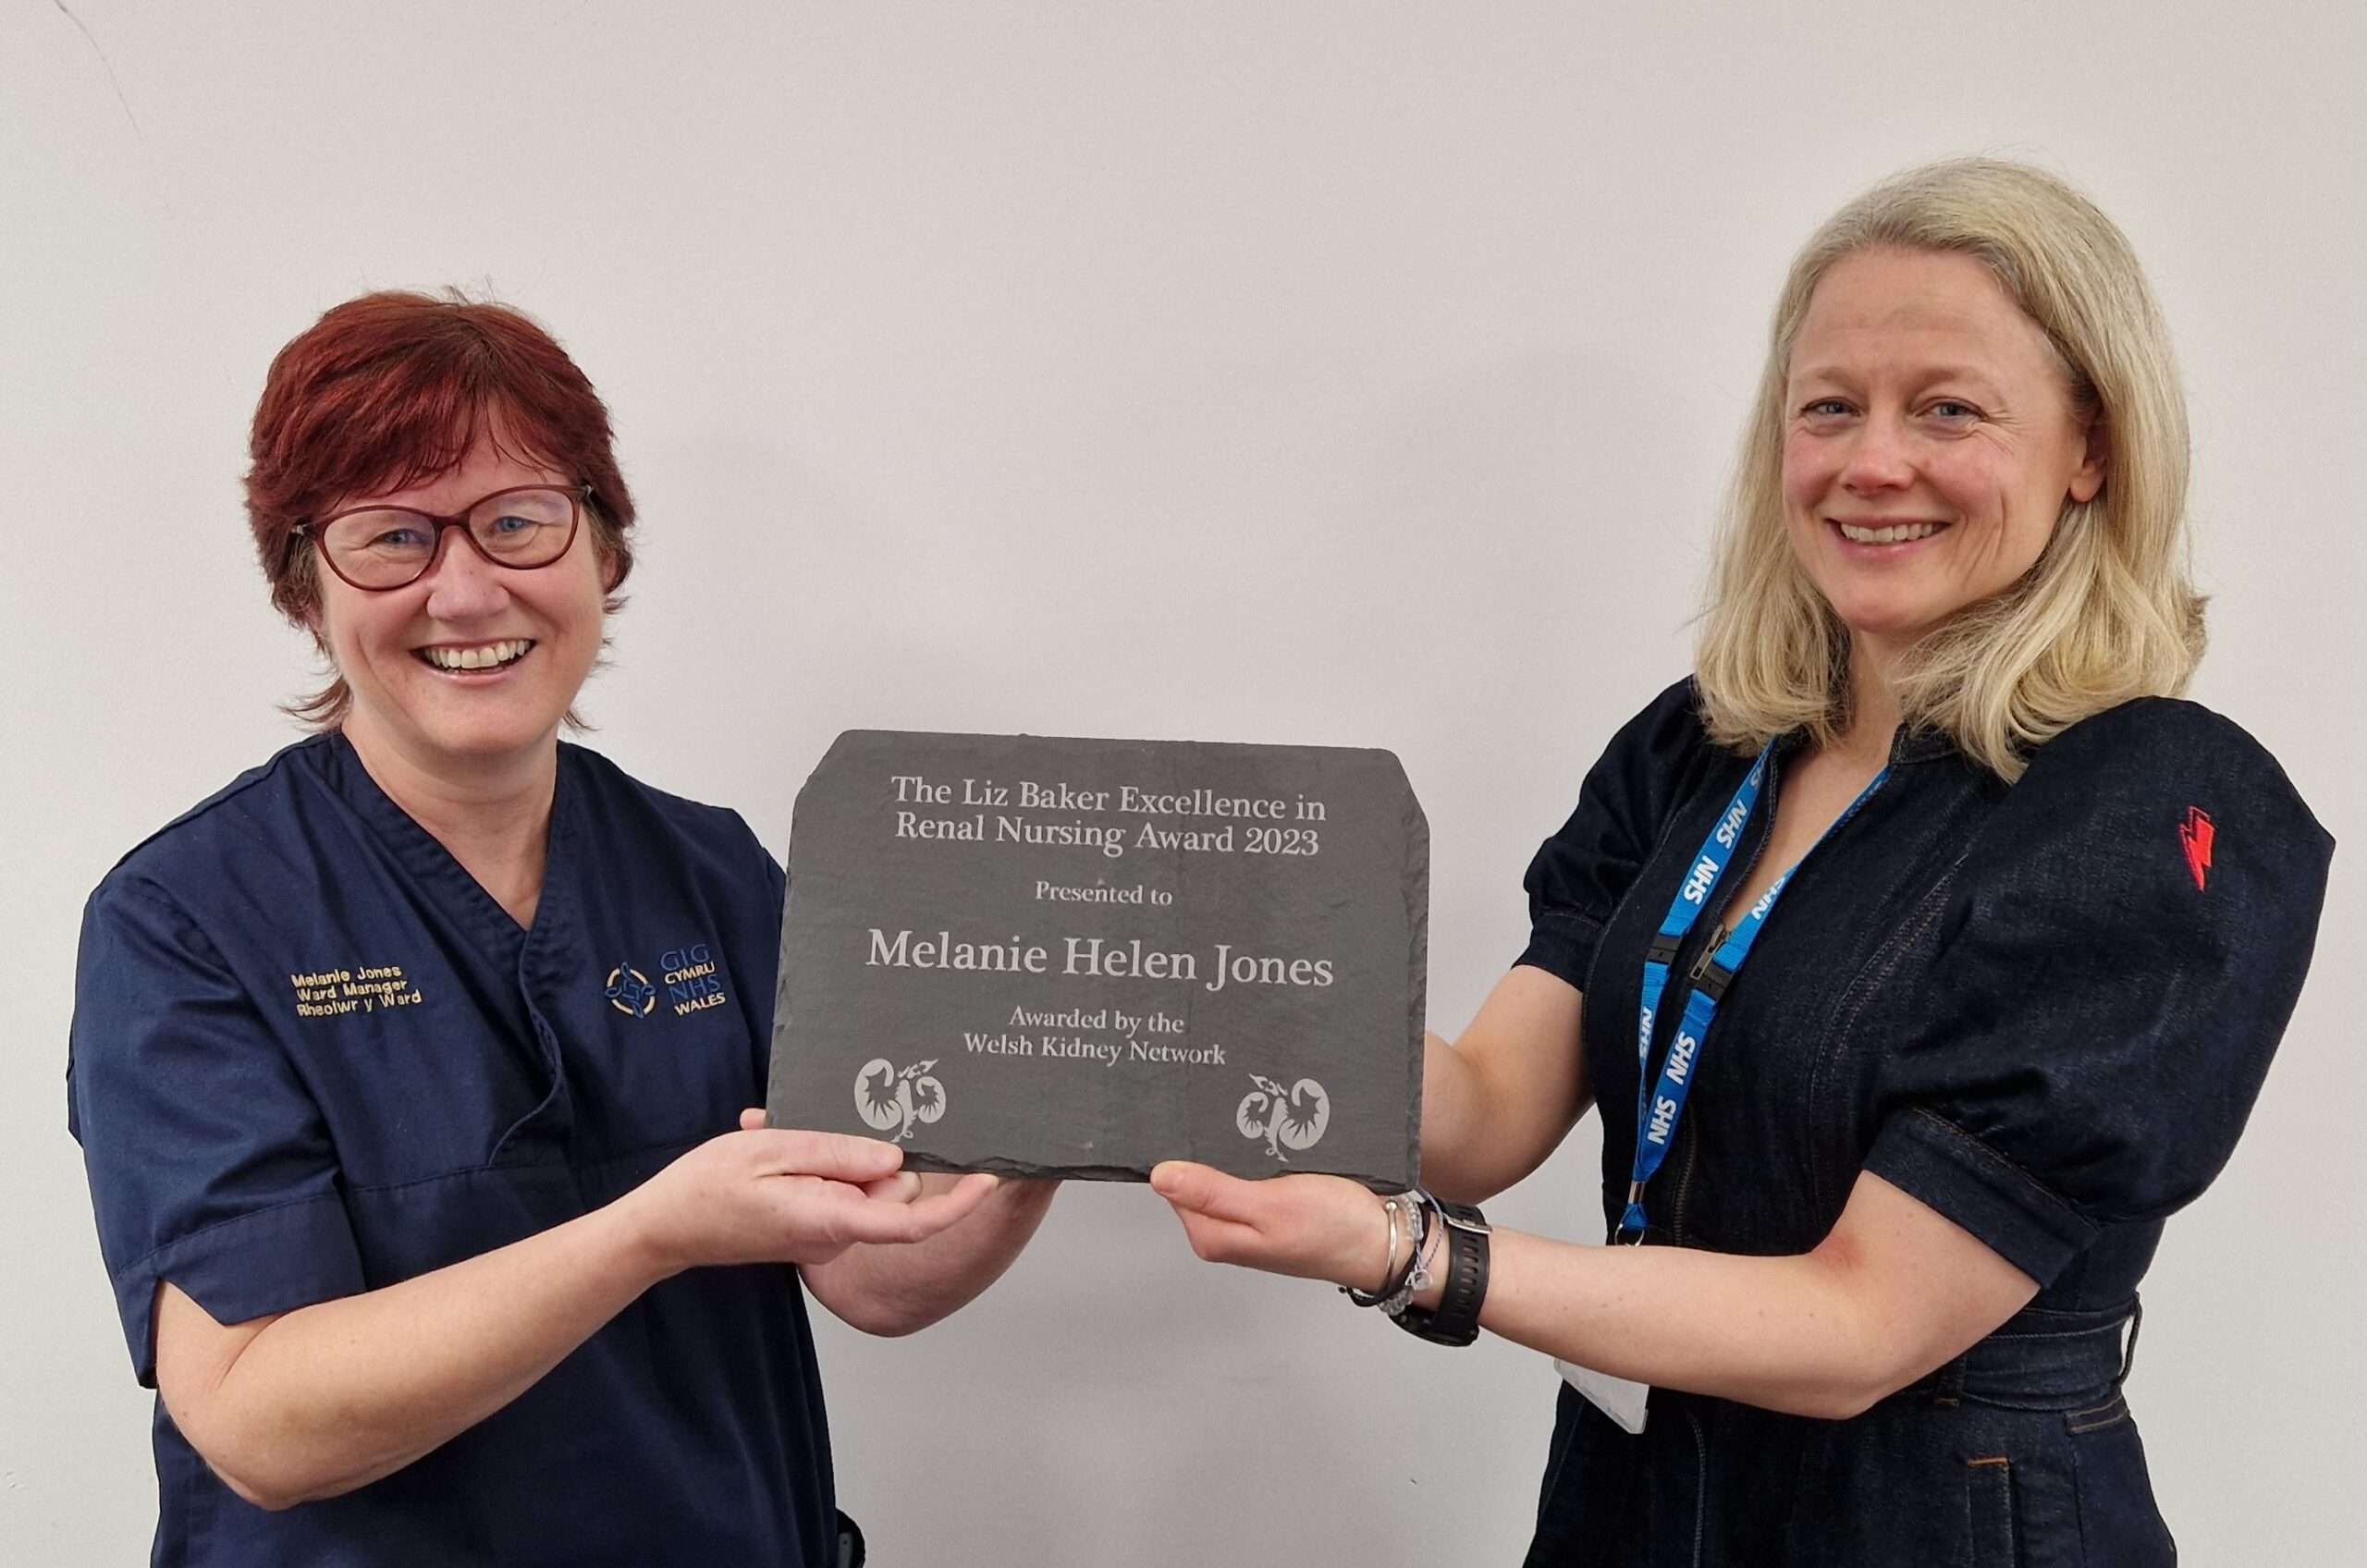 Renal nurse wins award for excellence in her mentor’s name